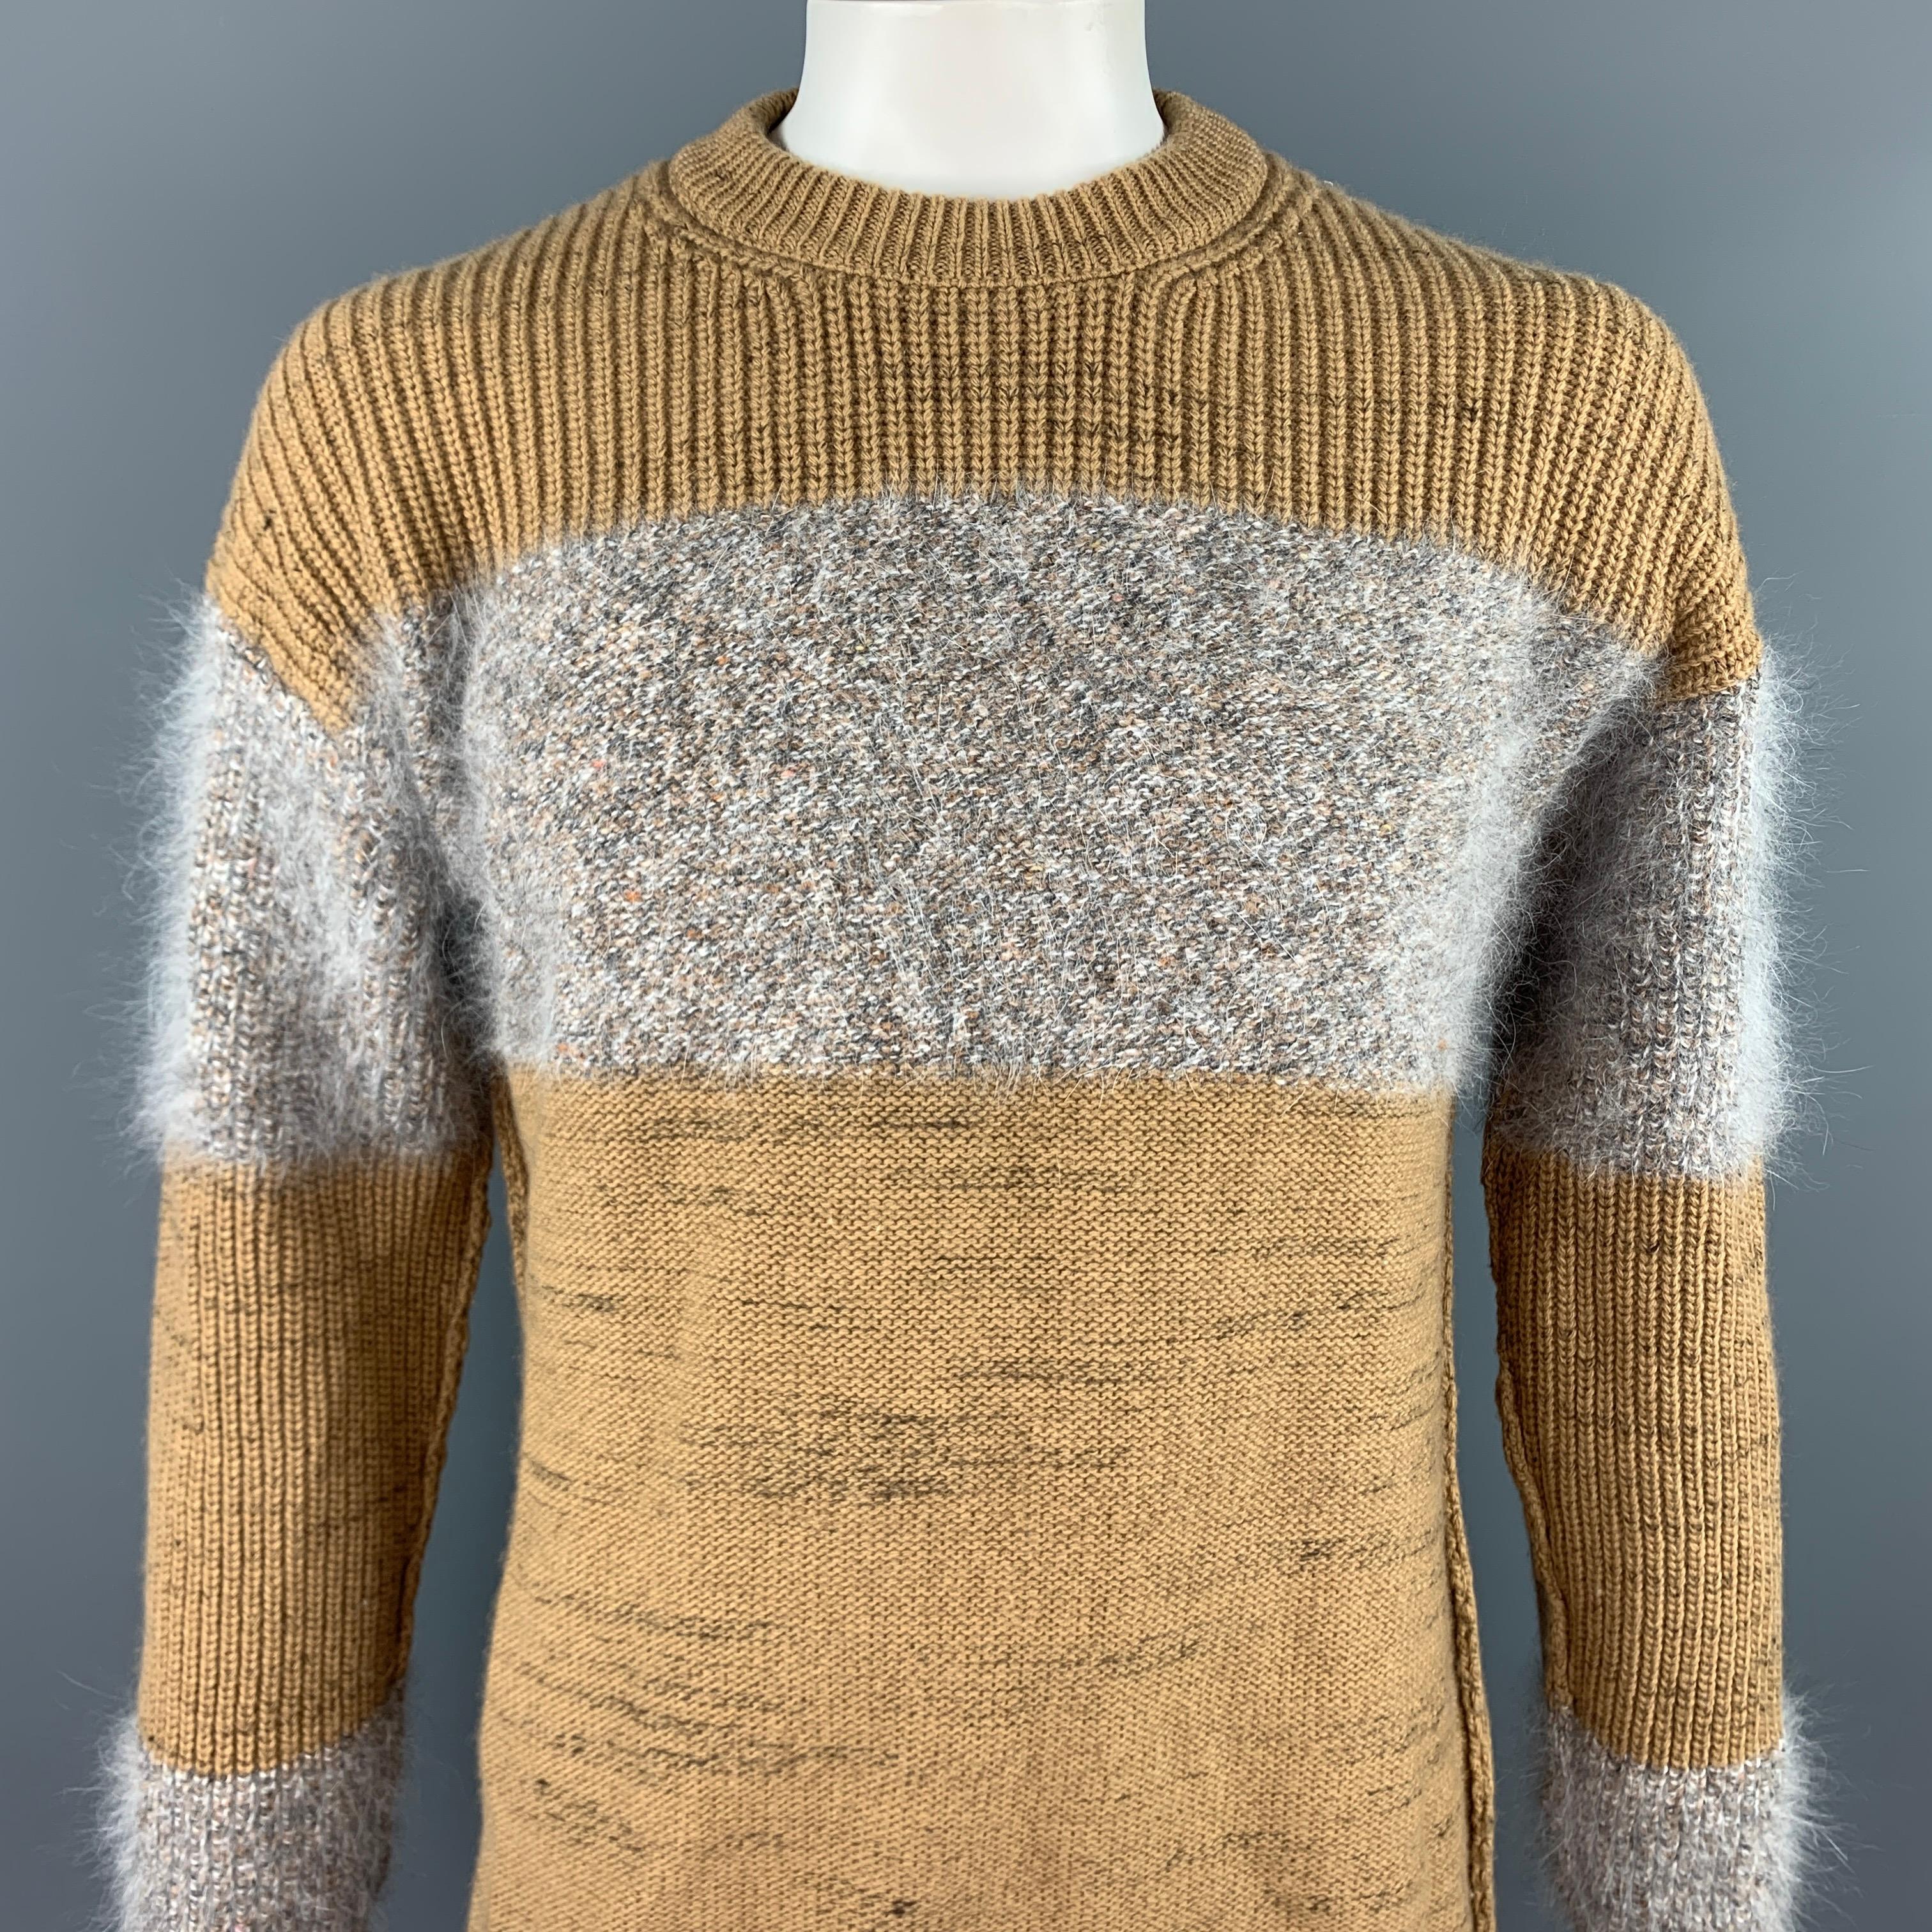 ROBERTO COLLINA sweater comes in a tan & grey knitted stripe wool blend featuring a ribbed hem and a crew-neck. Made in Italy.

Very Good Pre-Owned Condition.
Marked: IT 52

Measurements:

Shoulder: 24 in.
Chest: 44 in.
Sleeve: 25 in.
Length: 30 in. 